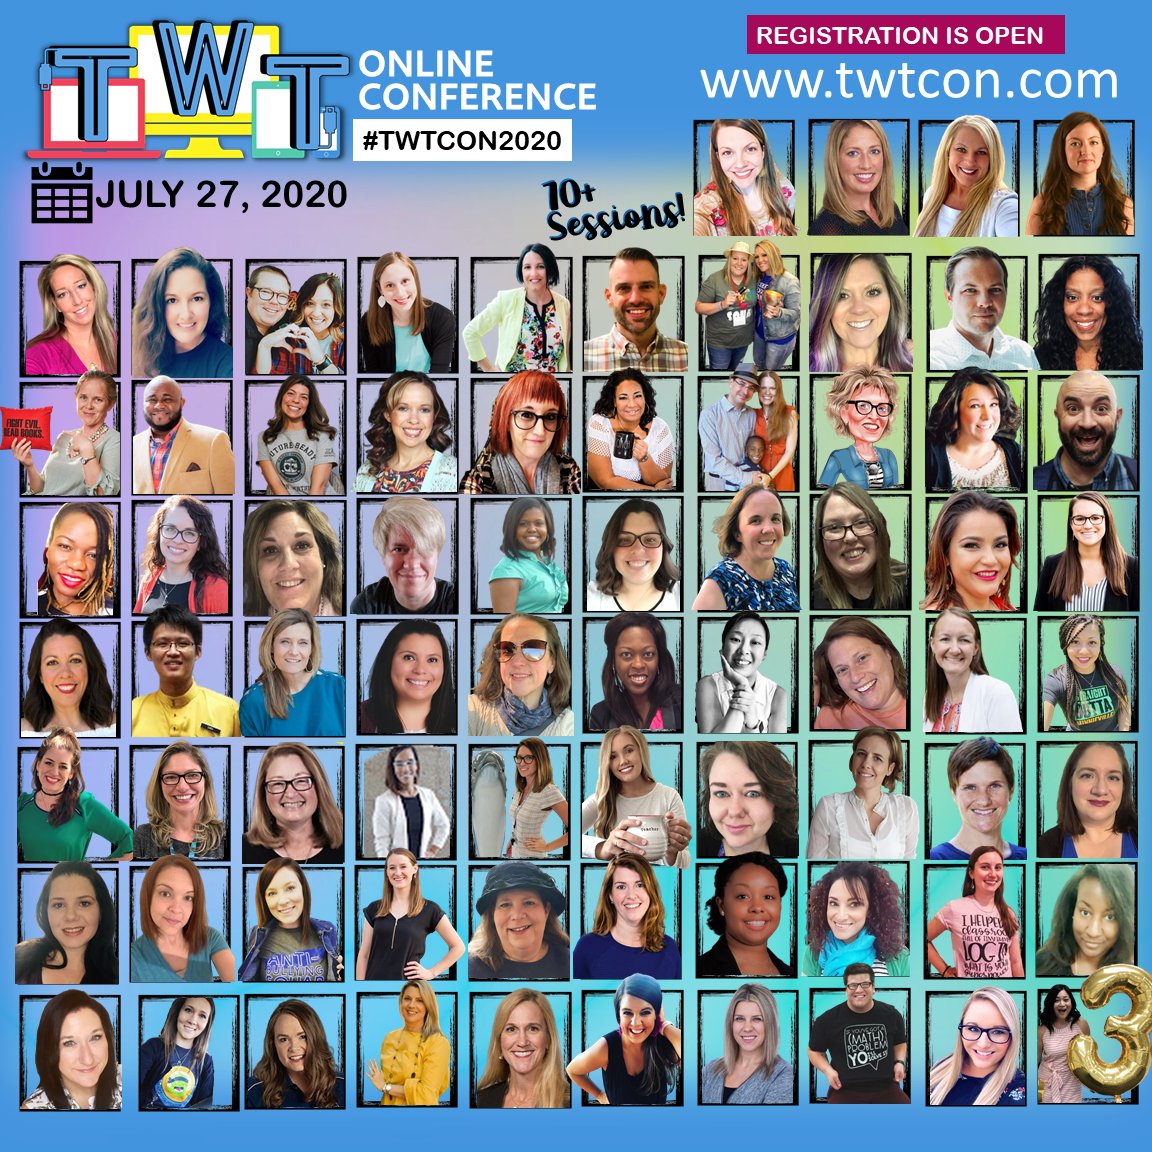 So excited to present at @TWTConference again this year! 🙌 I'll be sharing how I use Google Slides to create my weekly tech-y newsletters📰. Check out 🤩the amazing line-up of presenters ⬇️. Registration is now open teachwithtechconference.com. #BPSLearns #MTEdchat #1stChat 🏖️😎☀️